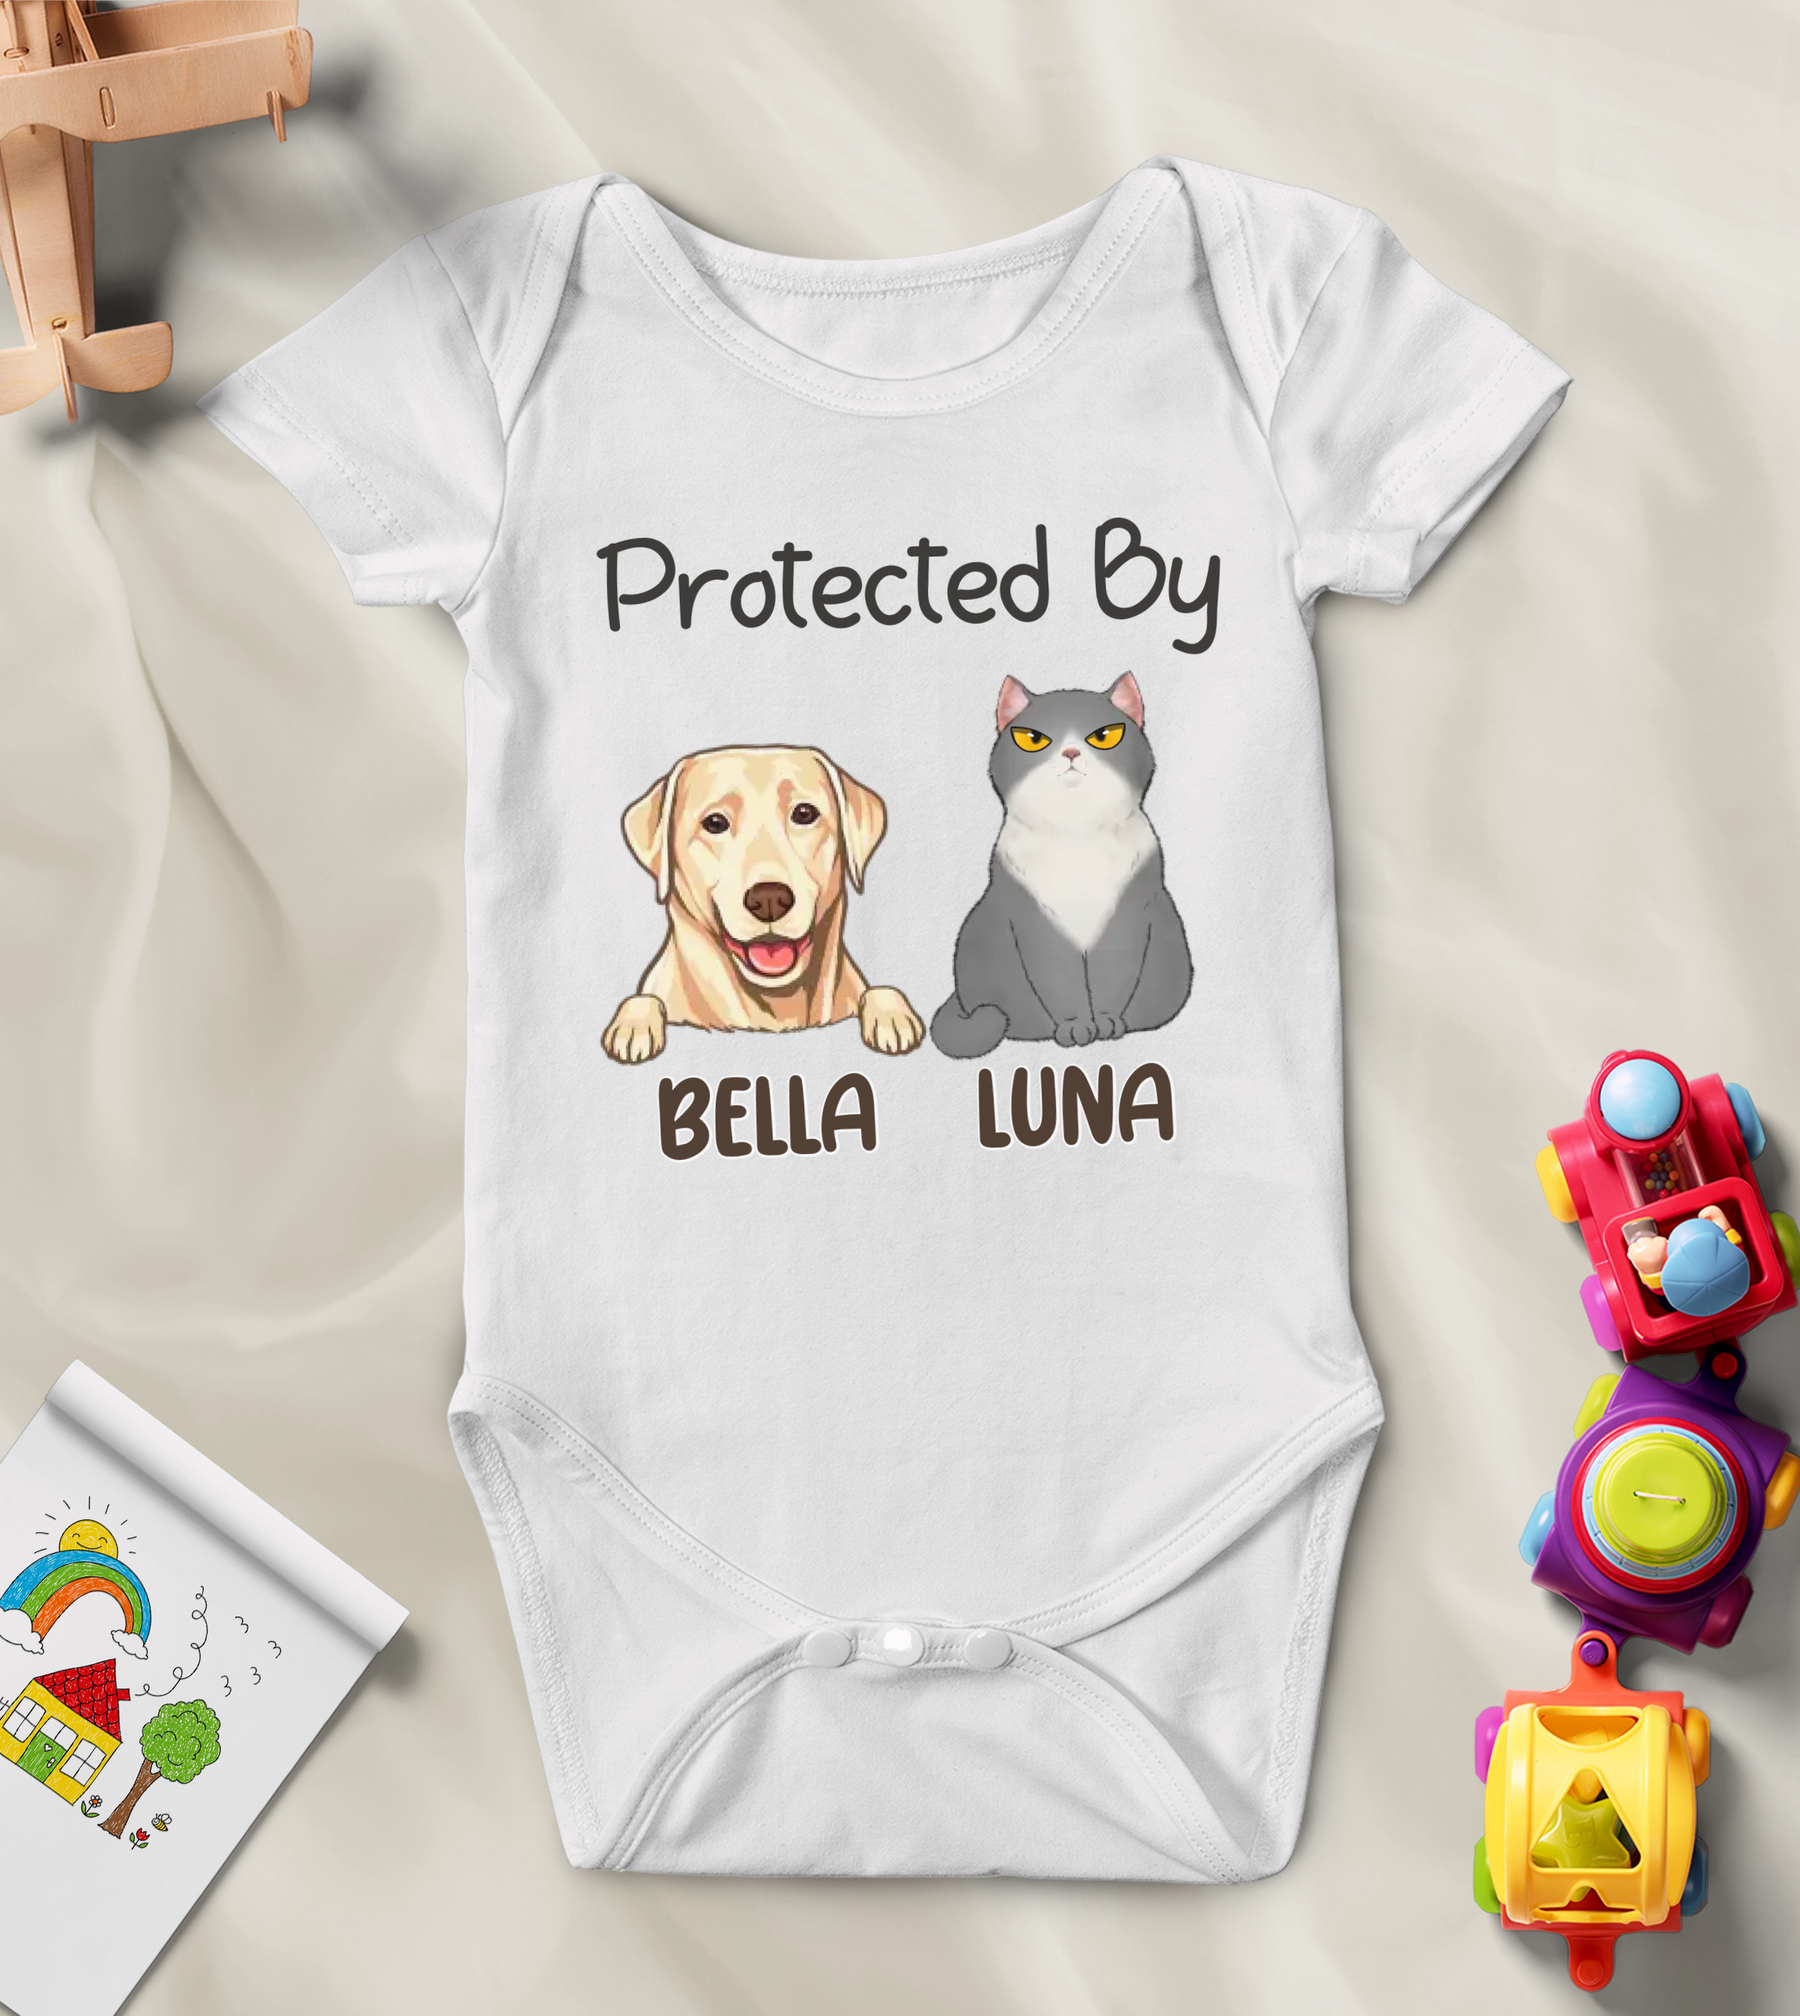 A white baby onesie with a quote "Protected by" followed by a portrait of a dog or cat and their name printed on it.